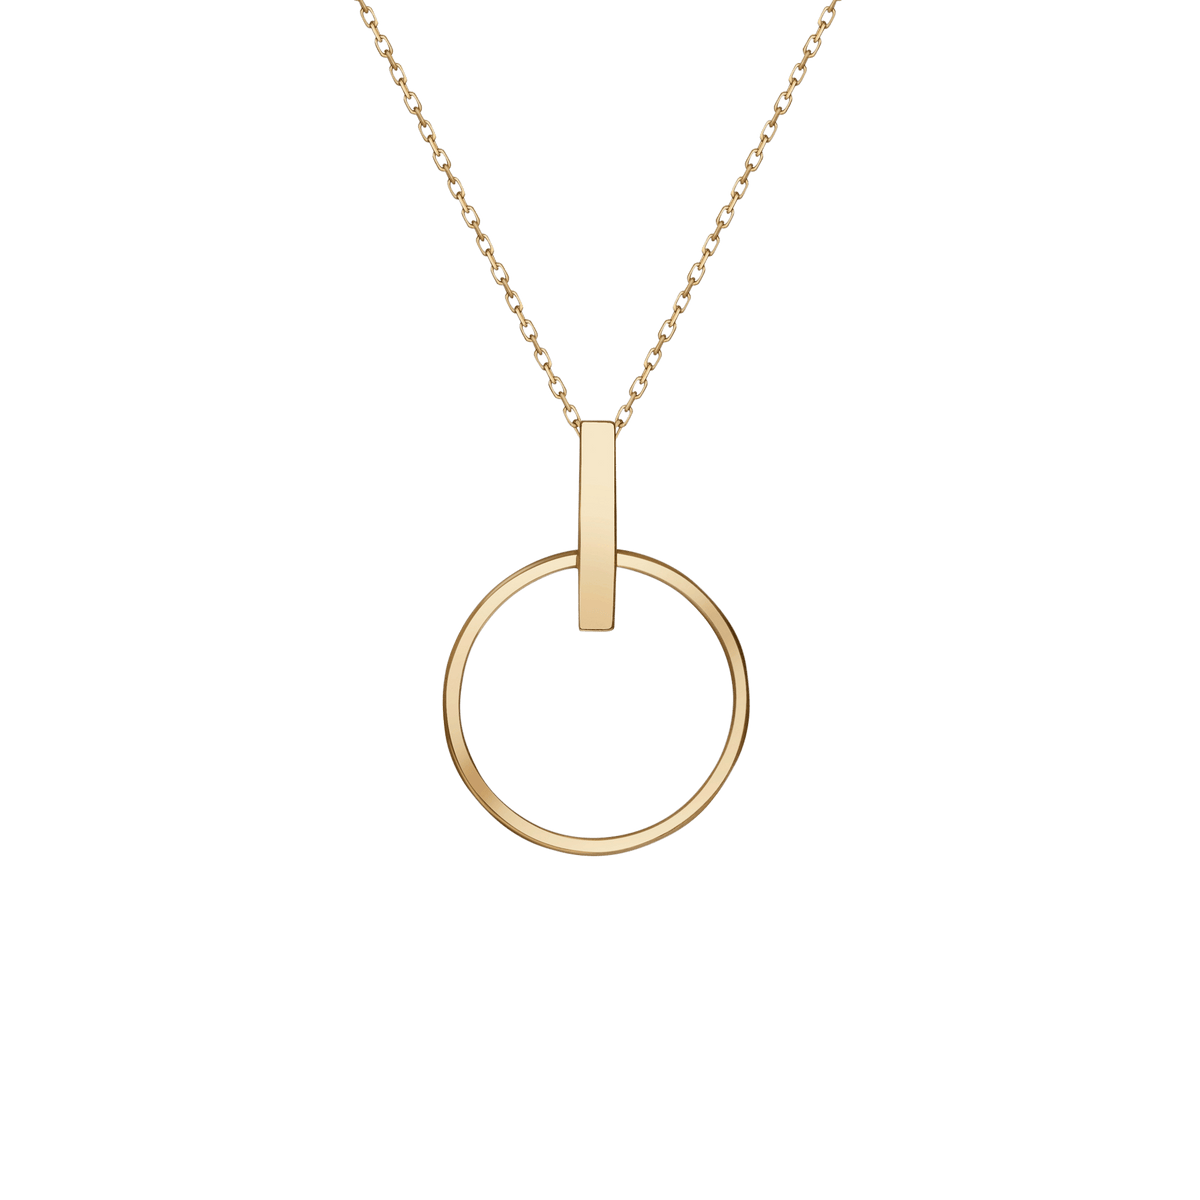 Aurate New York Small Box Chain Necklace, 18K White Gold